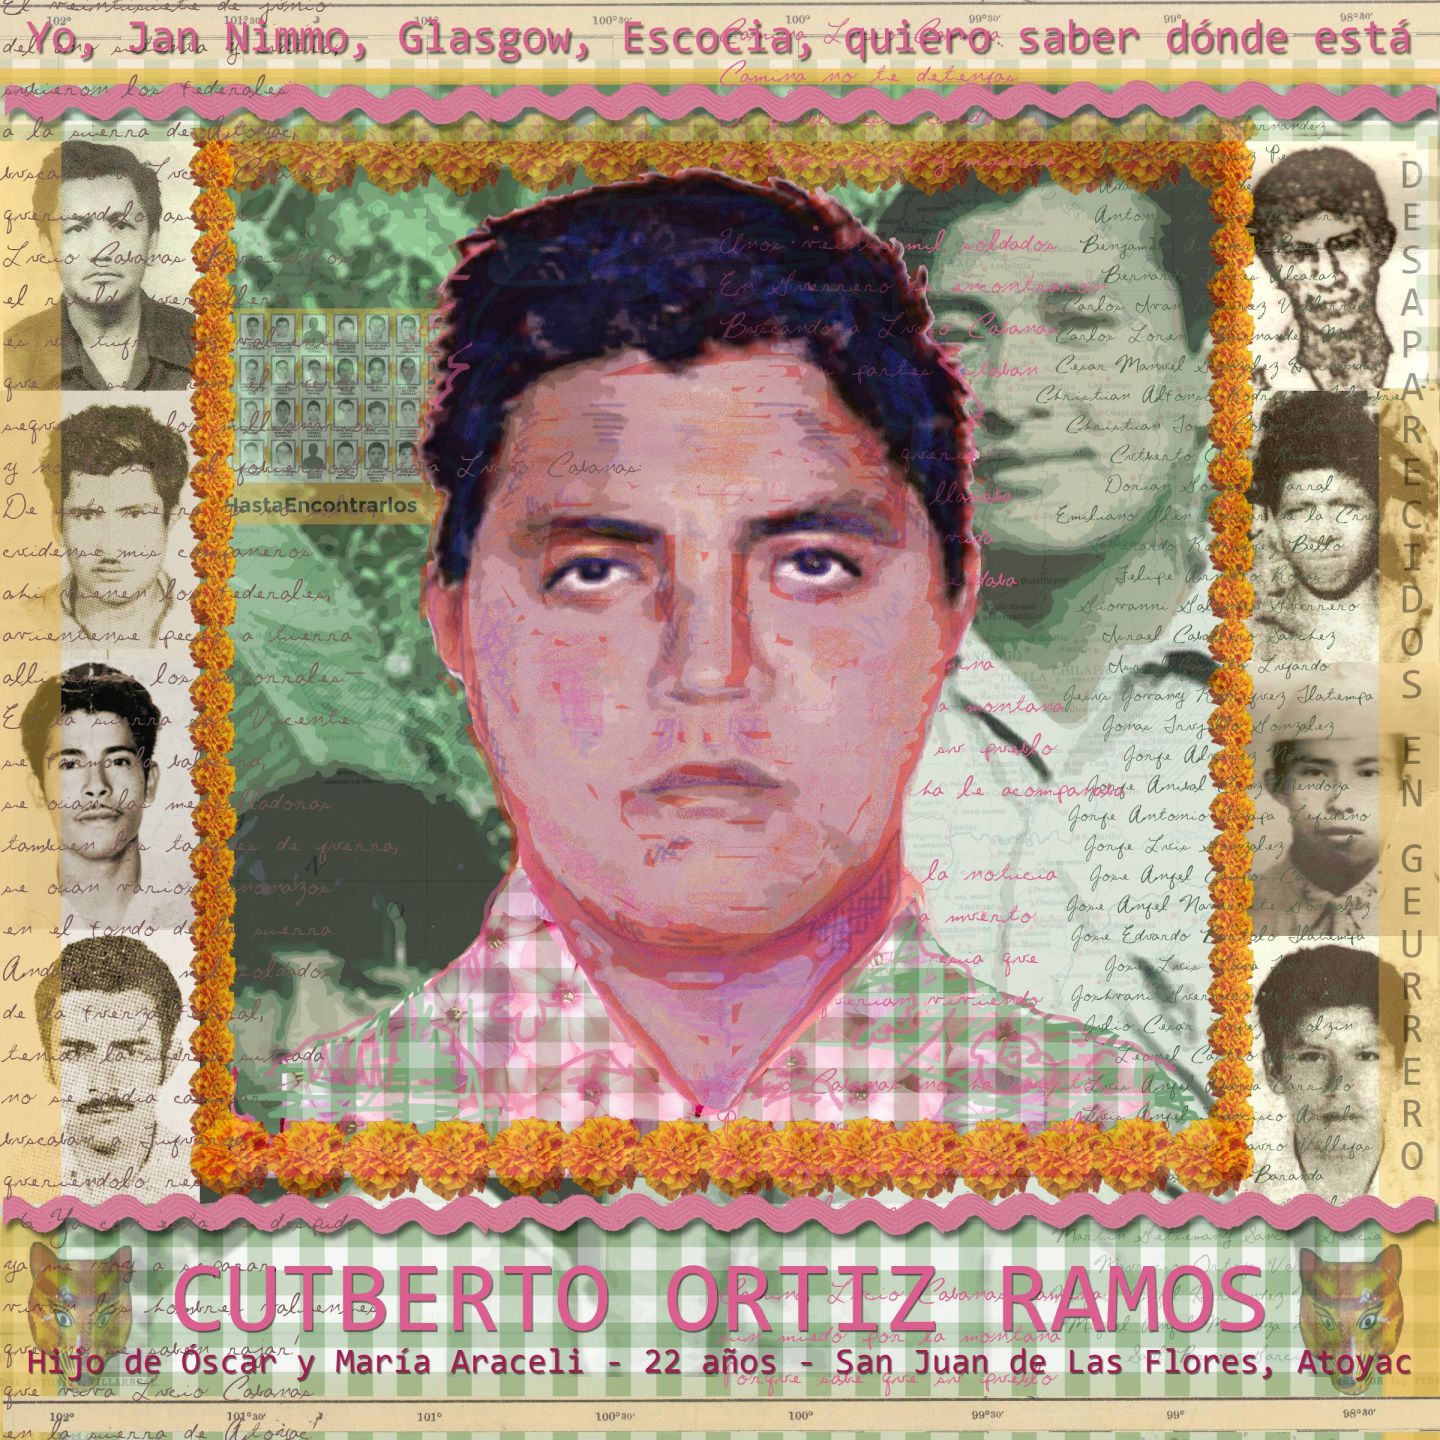 A tribute to Mexico's disappeared amidst demands for the truth 42